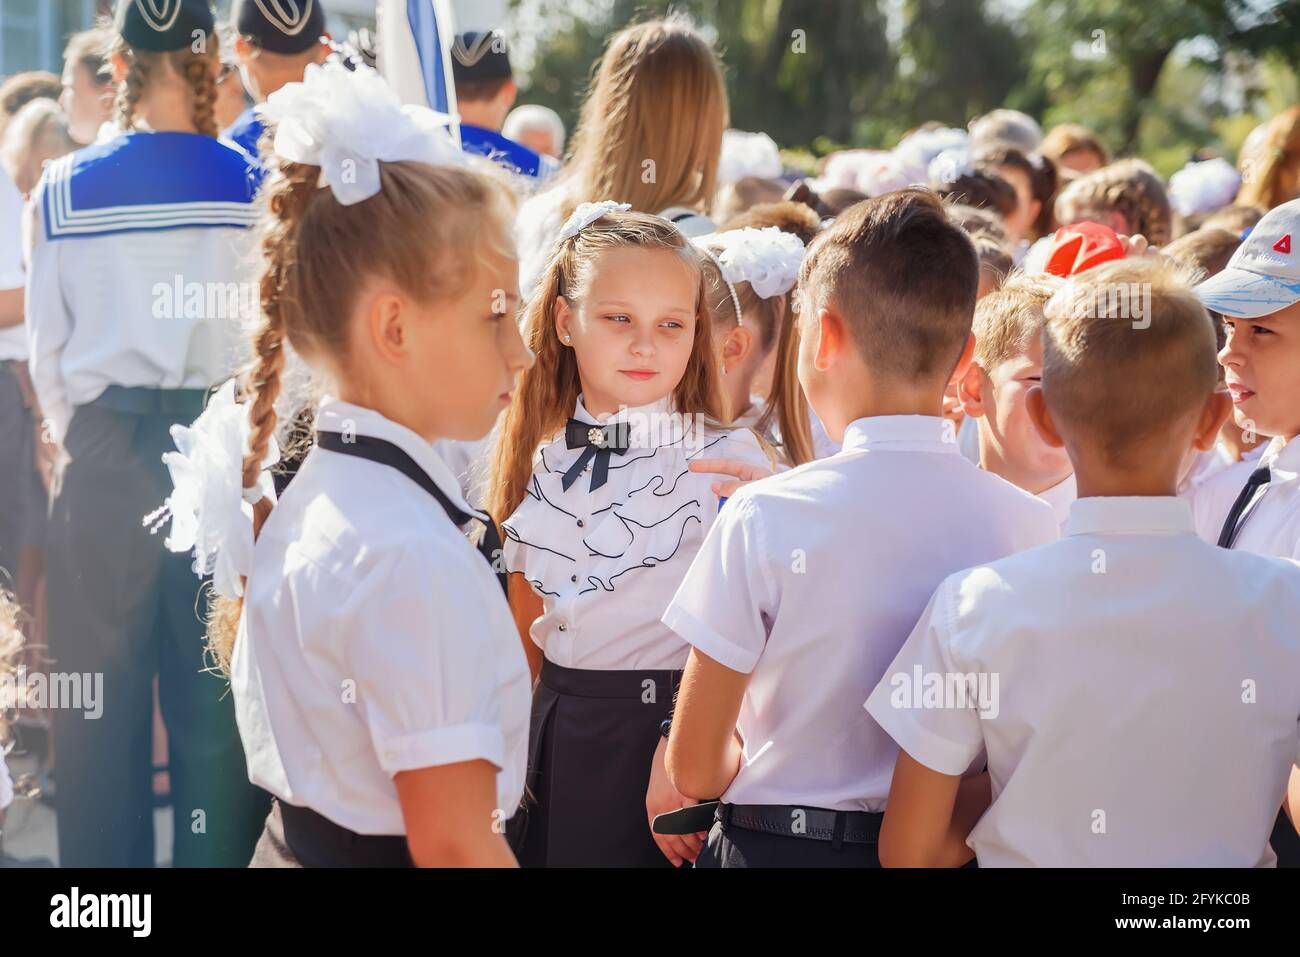 Kerch Russia - September 1, 2020 - children go to school, first bell,  childrens in school uniforms, teachers and parents in the background near  the sc Stock Photo - Alamy